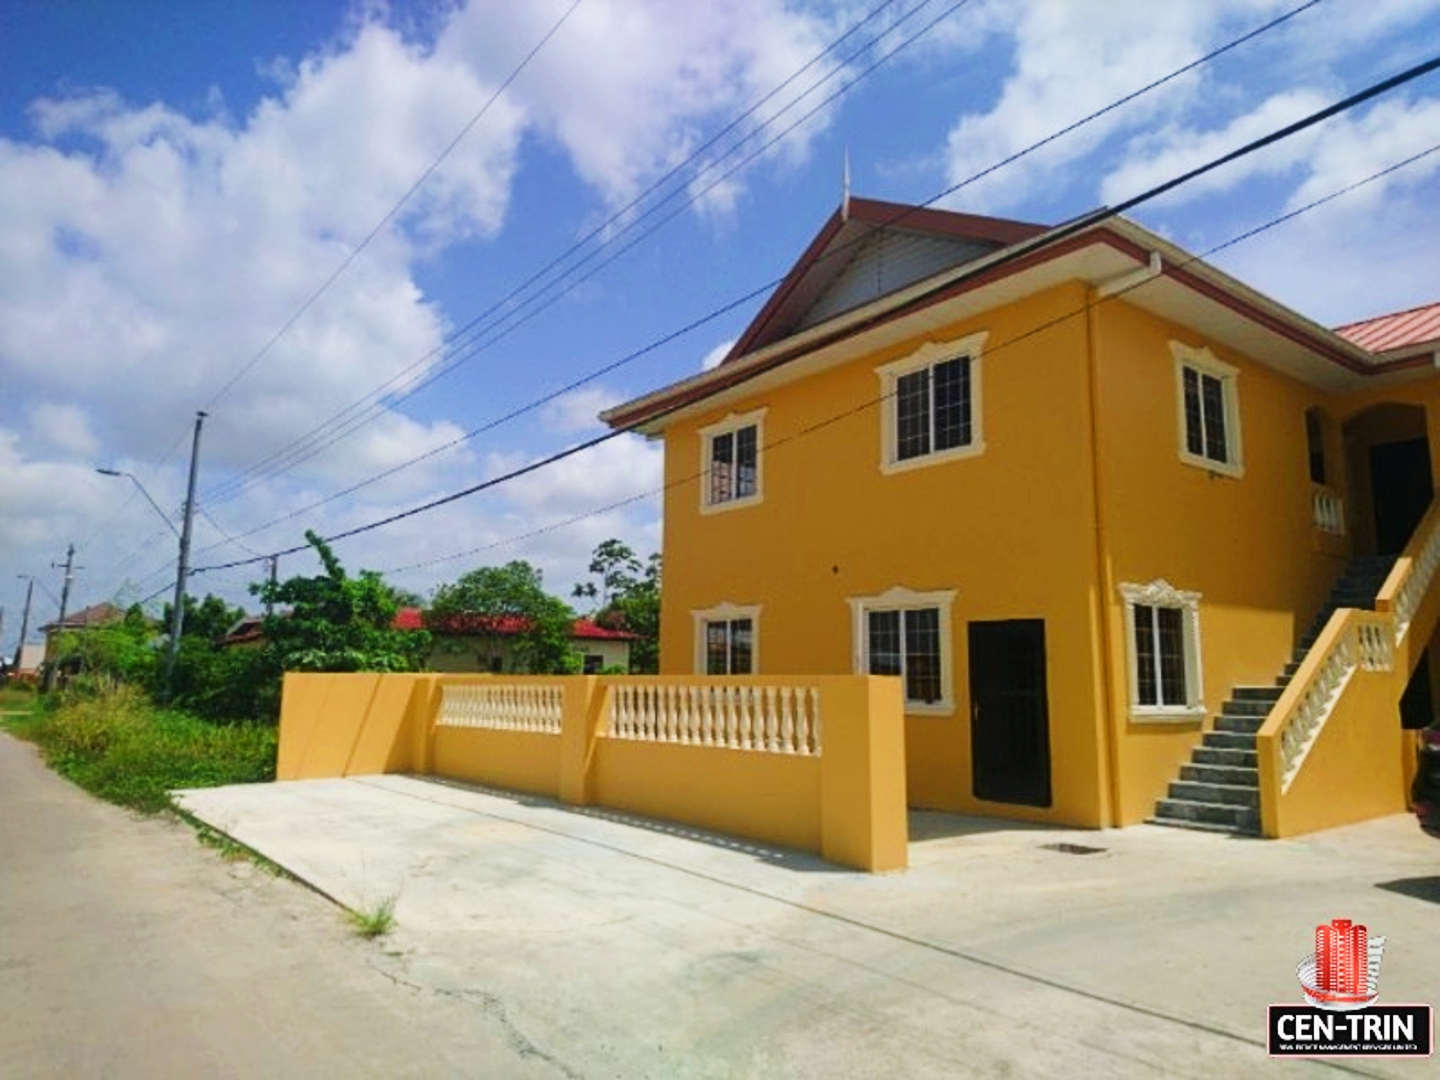 Affordable 2 Bedroom Apartments | A yellow two-story apartment building with stairs leading up to the first floor. There is a sign out front that says "For Rent." The building is located in a rural area with trees in the background.